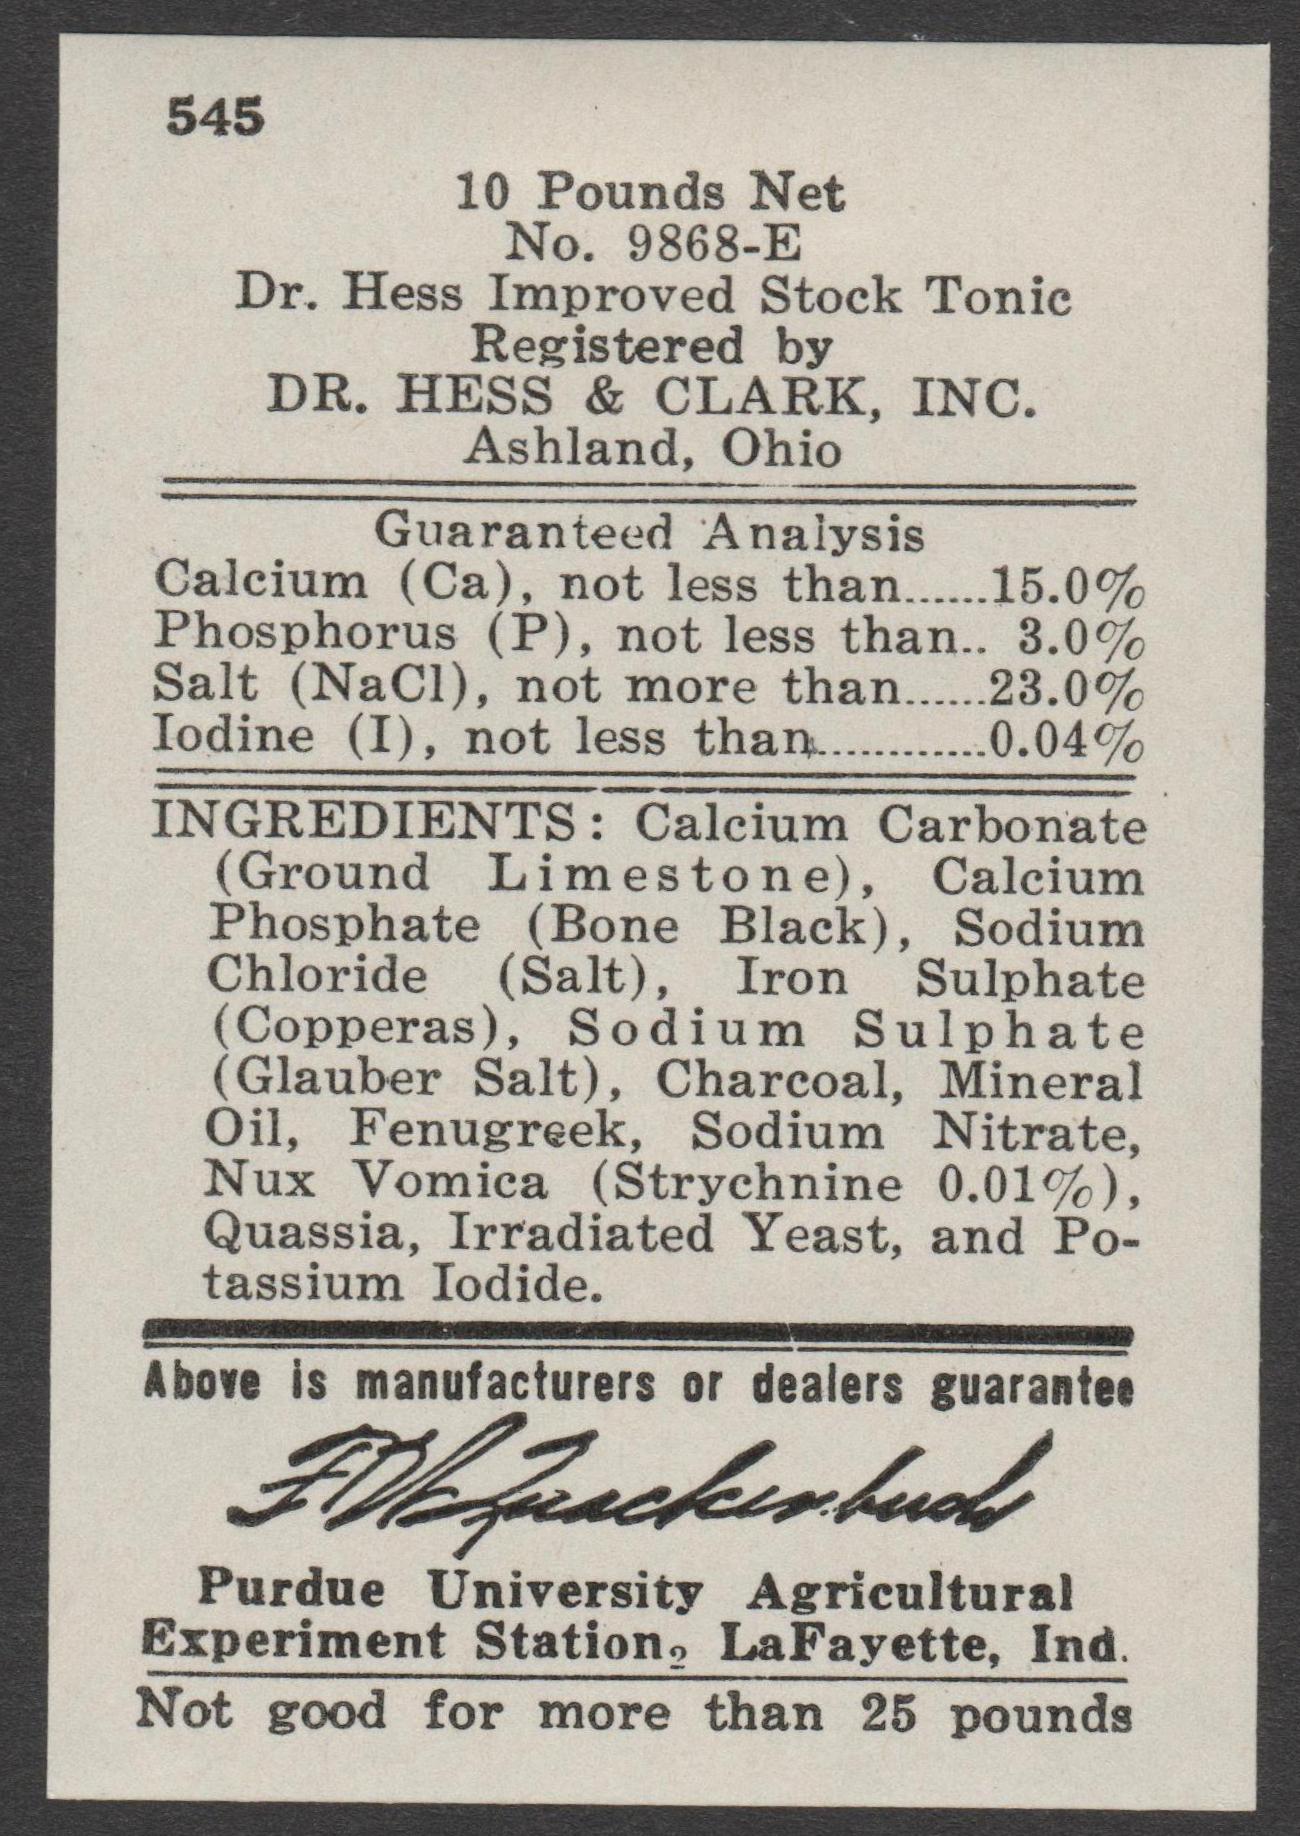 IN feed FE25 10 lbs. MLH VF, Dr. Hoss Improved Stock Tonic P